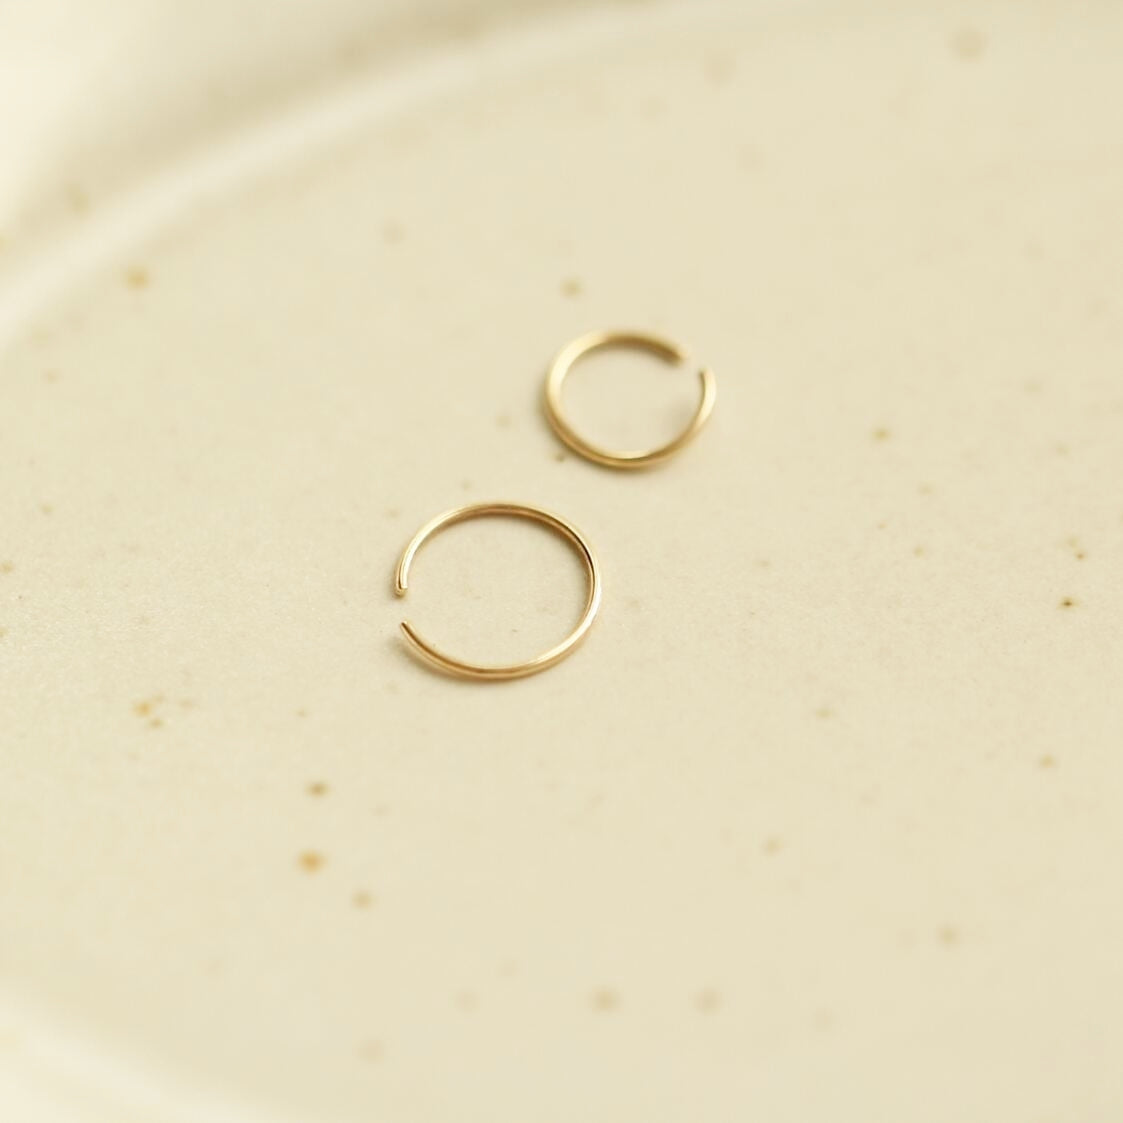 24K Gold Jewelry. Solid 24k Gold Nose Ring. 24k Solid Gold Hoop. One Ring. Solid  Gold Ball Earrings. Tiny Gold Nose Ring Hoop - Etsy Finland